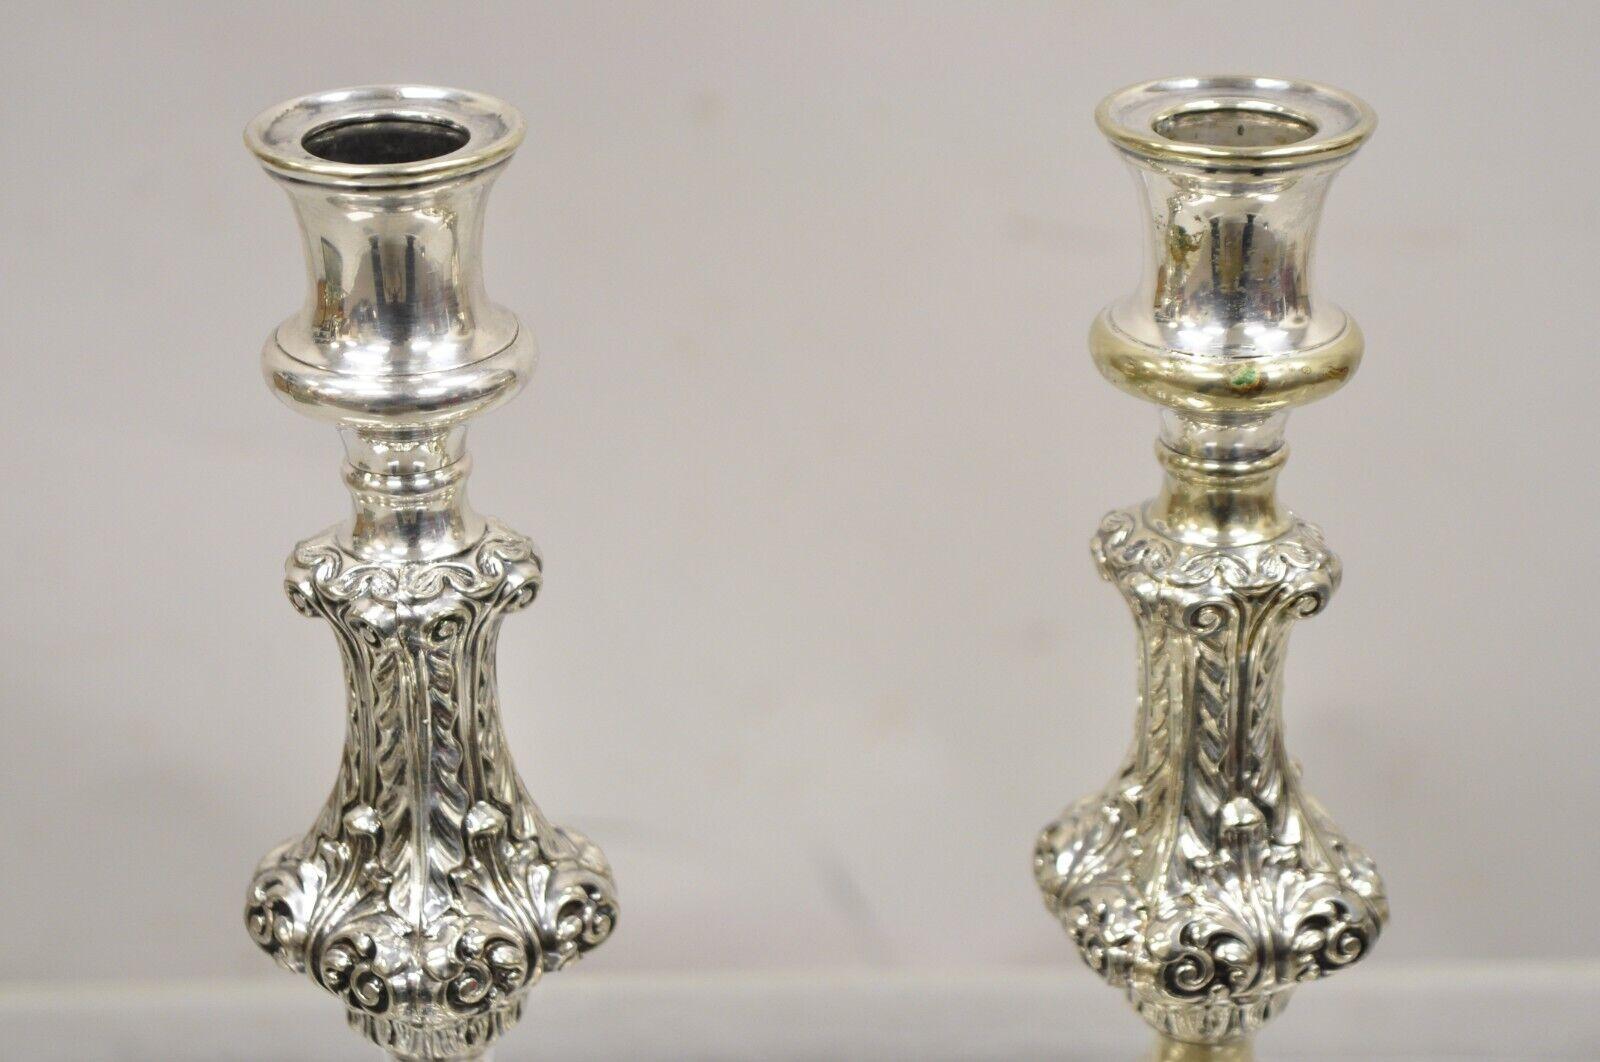 Vintage Gorham Baroque Repousse Silver Plated Single Candle Candlesticks a Pair For Sale 1